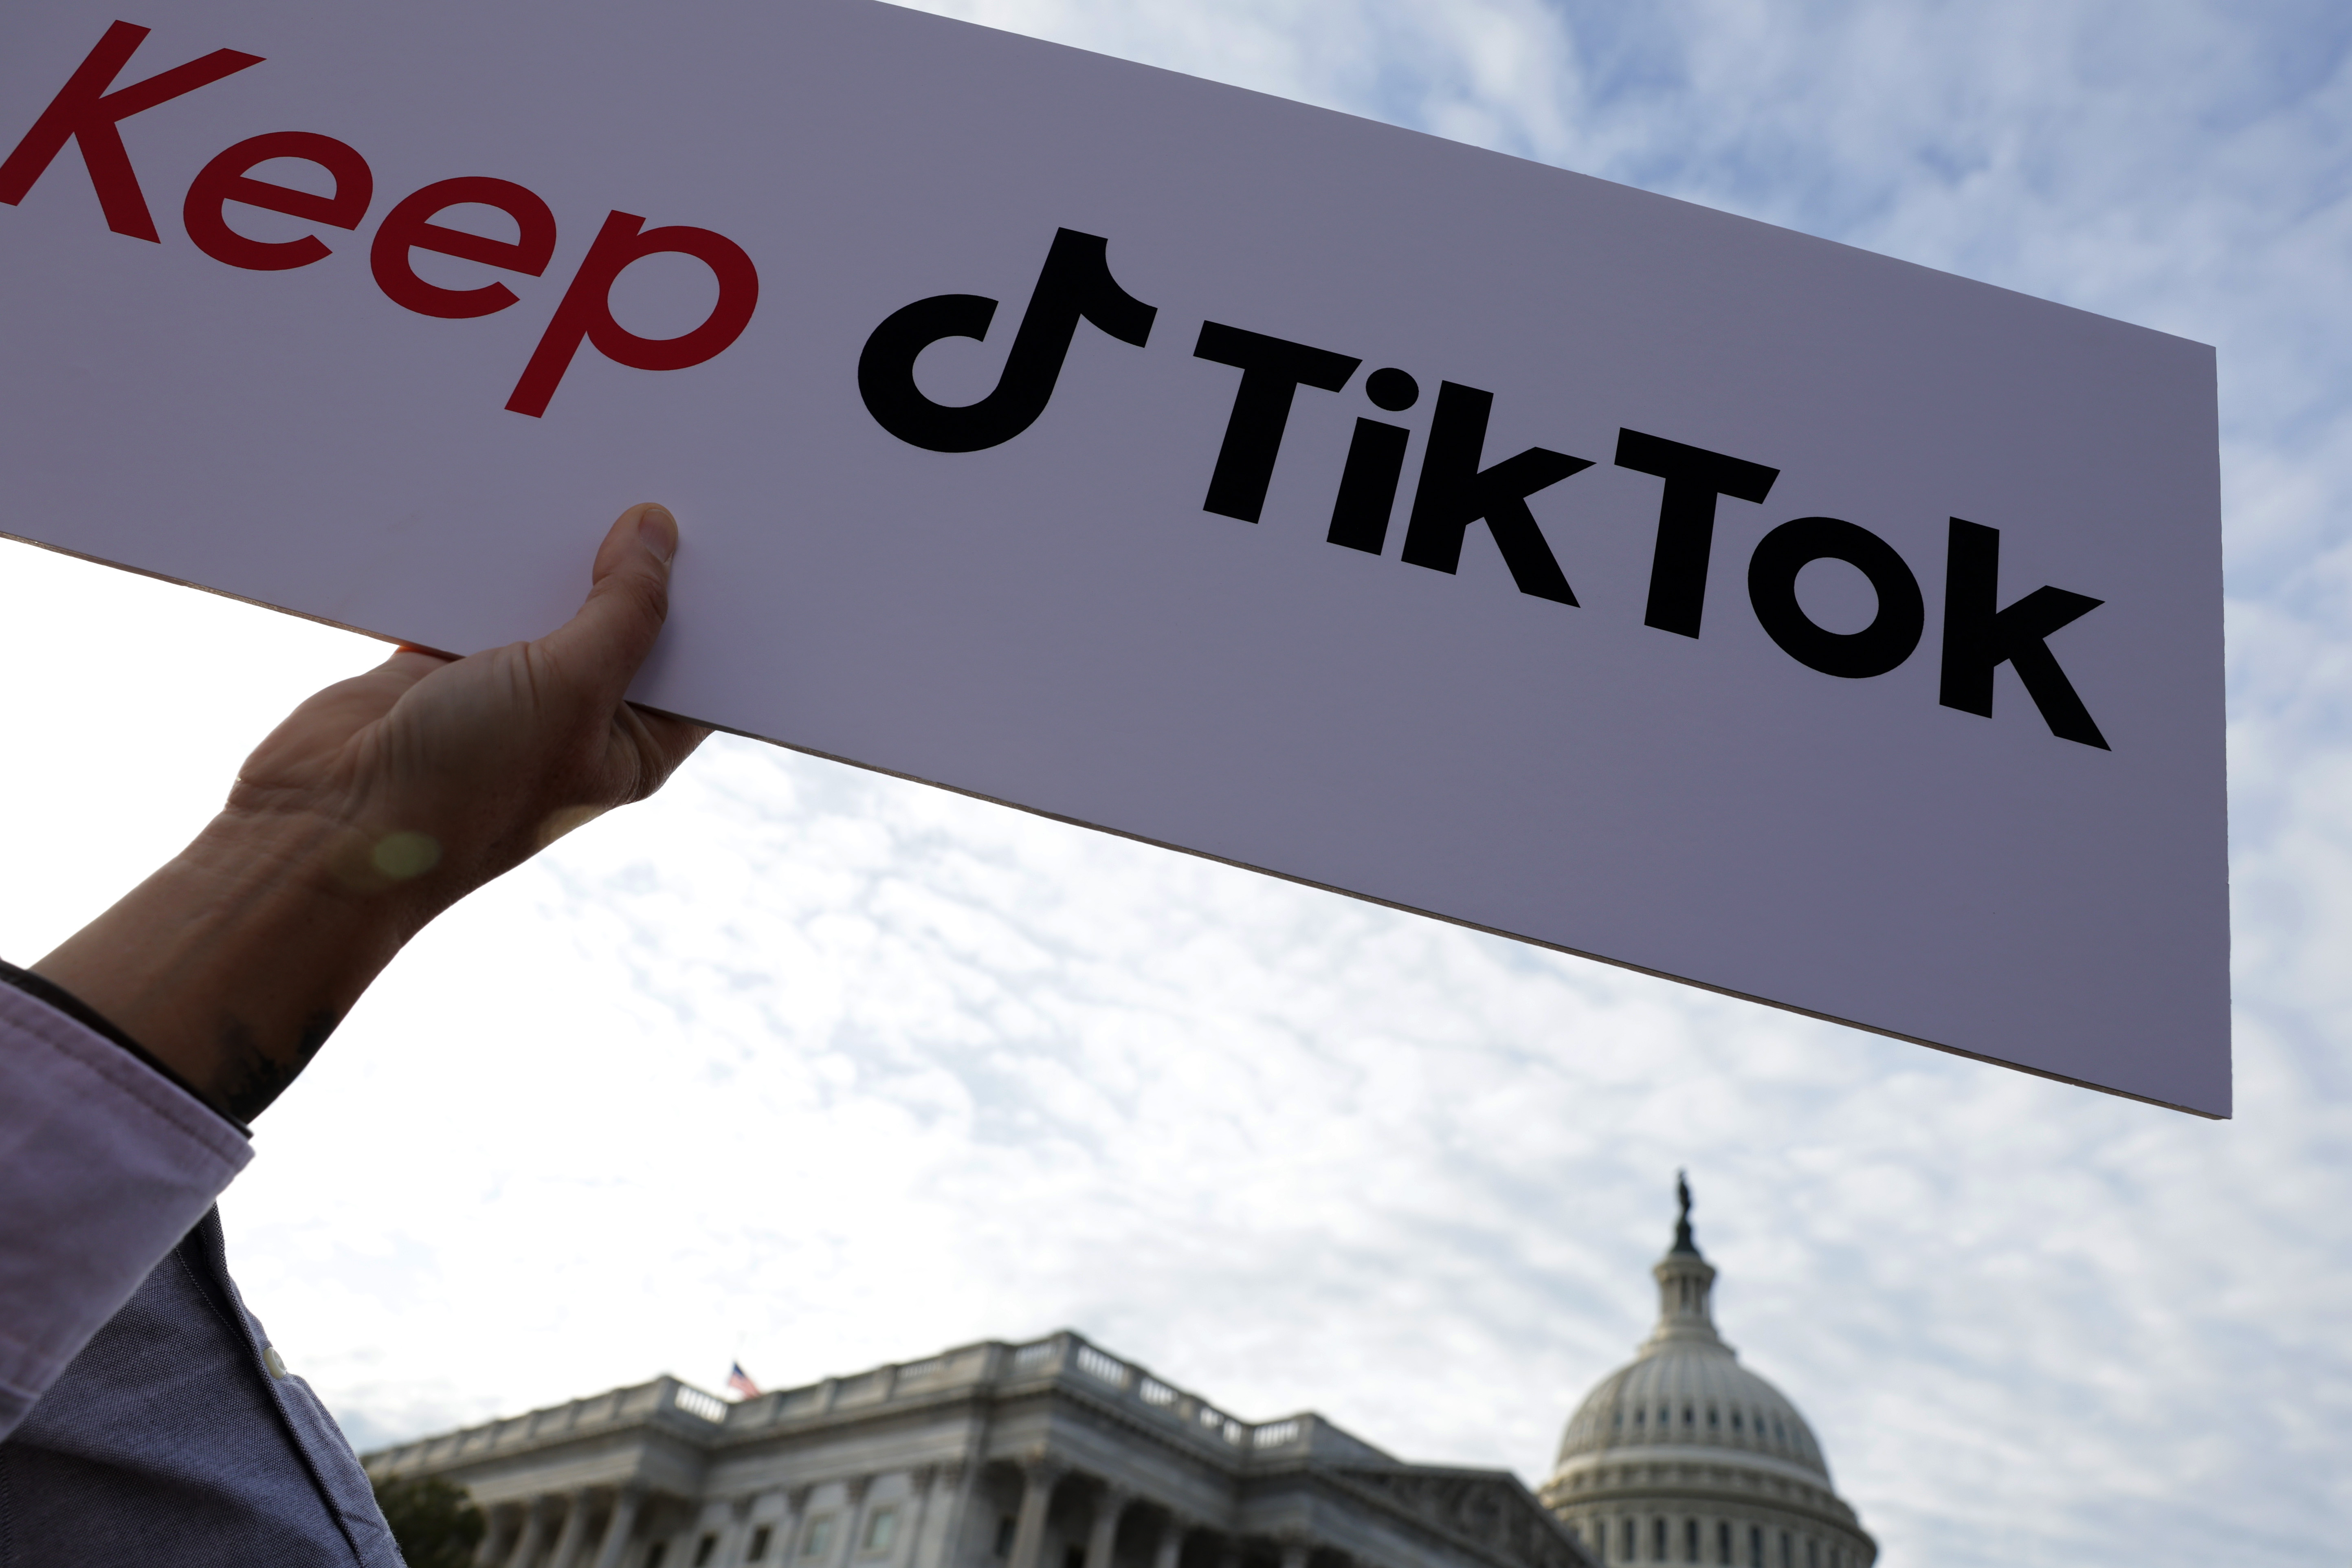 Rep. Bowman Is Joined By TikTok Users To Speak Out Against Banning The App. A photo of a person holding a sign outside congress that says: “Keep TikTok.”